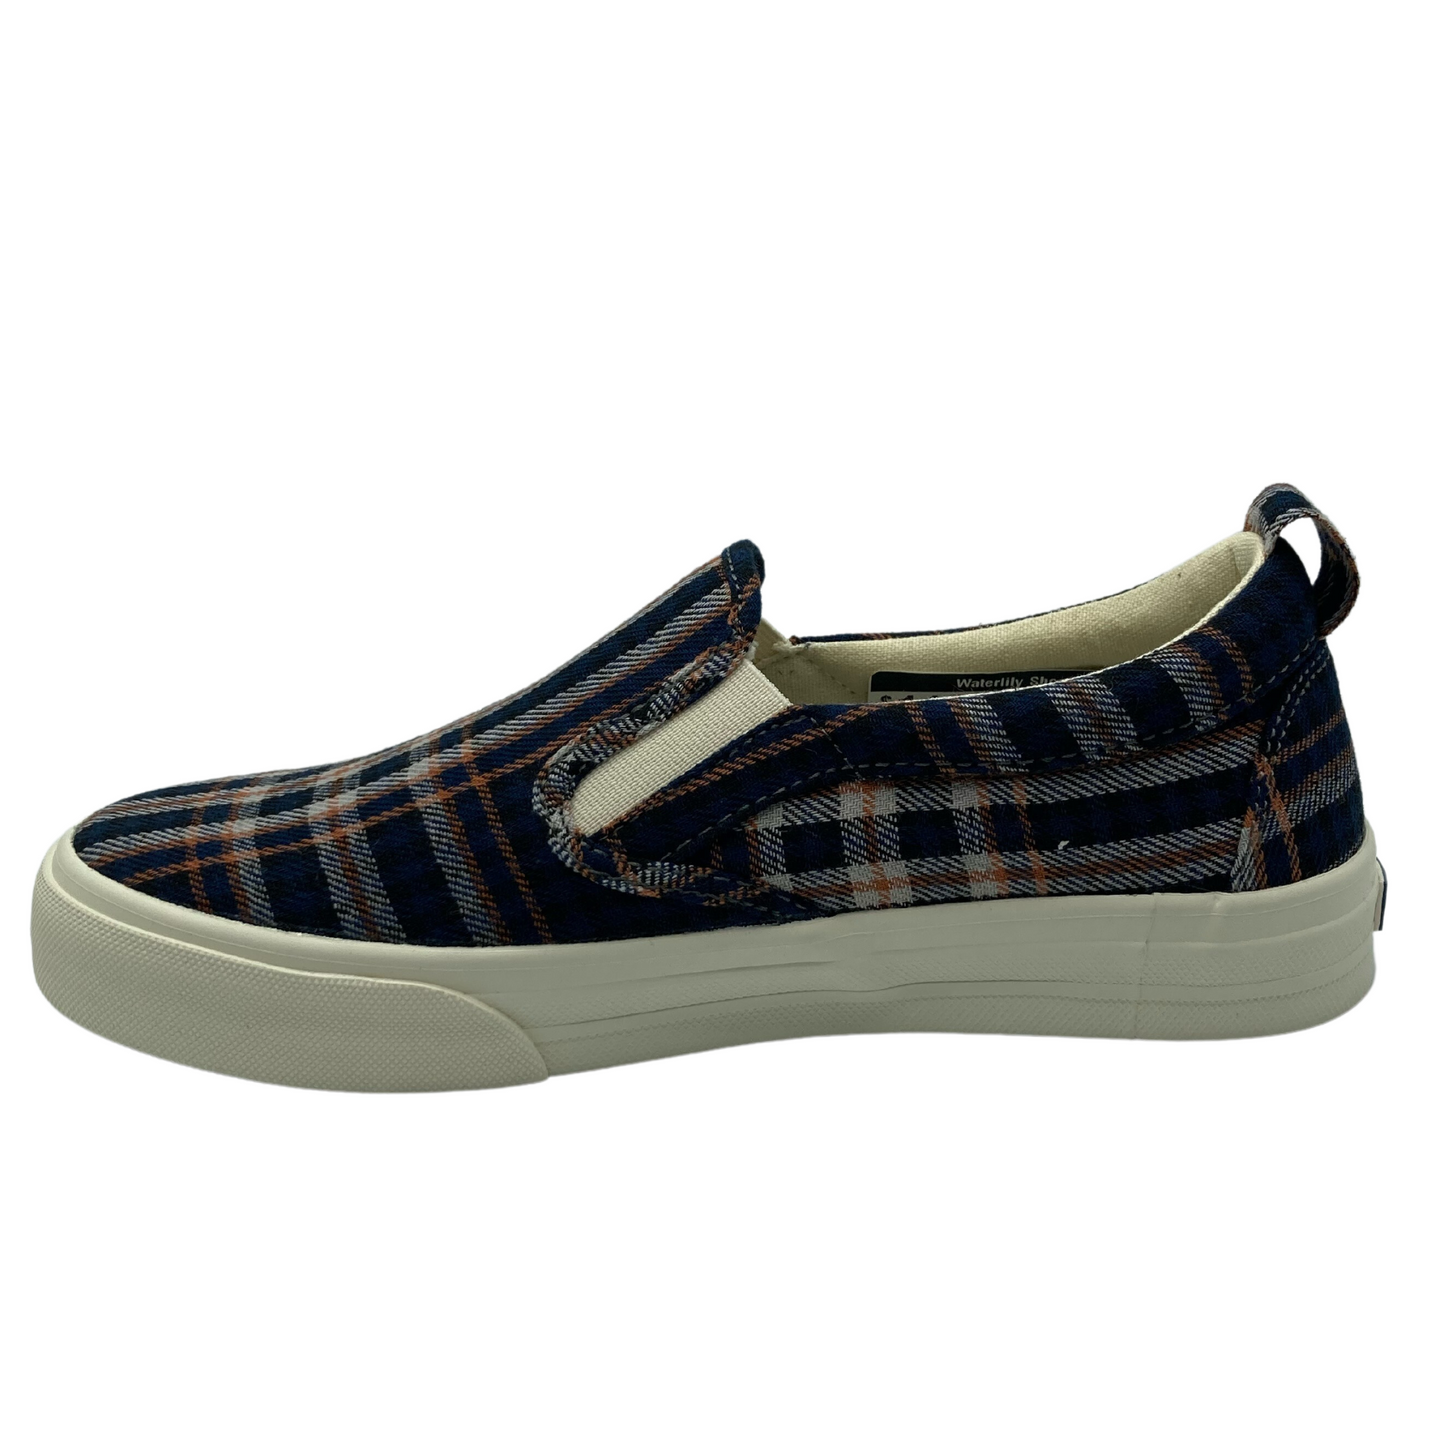 Left facing view of blue plaid canvas slip on shoe with white rubber sole